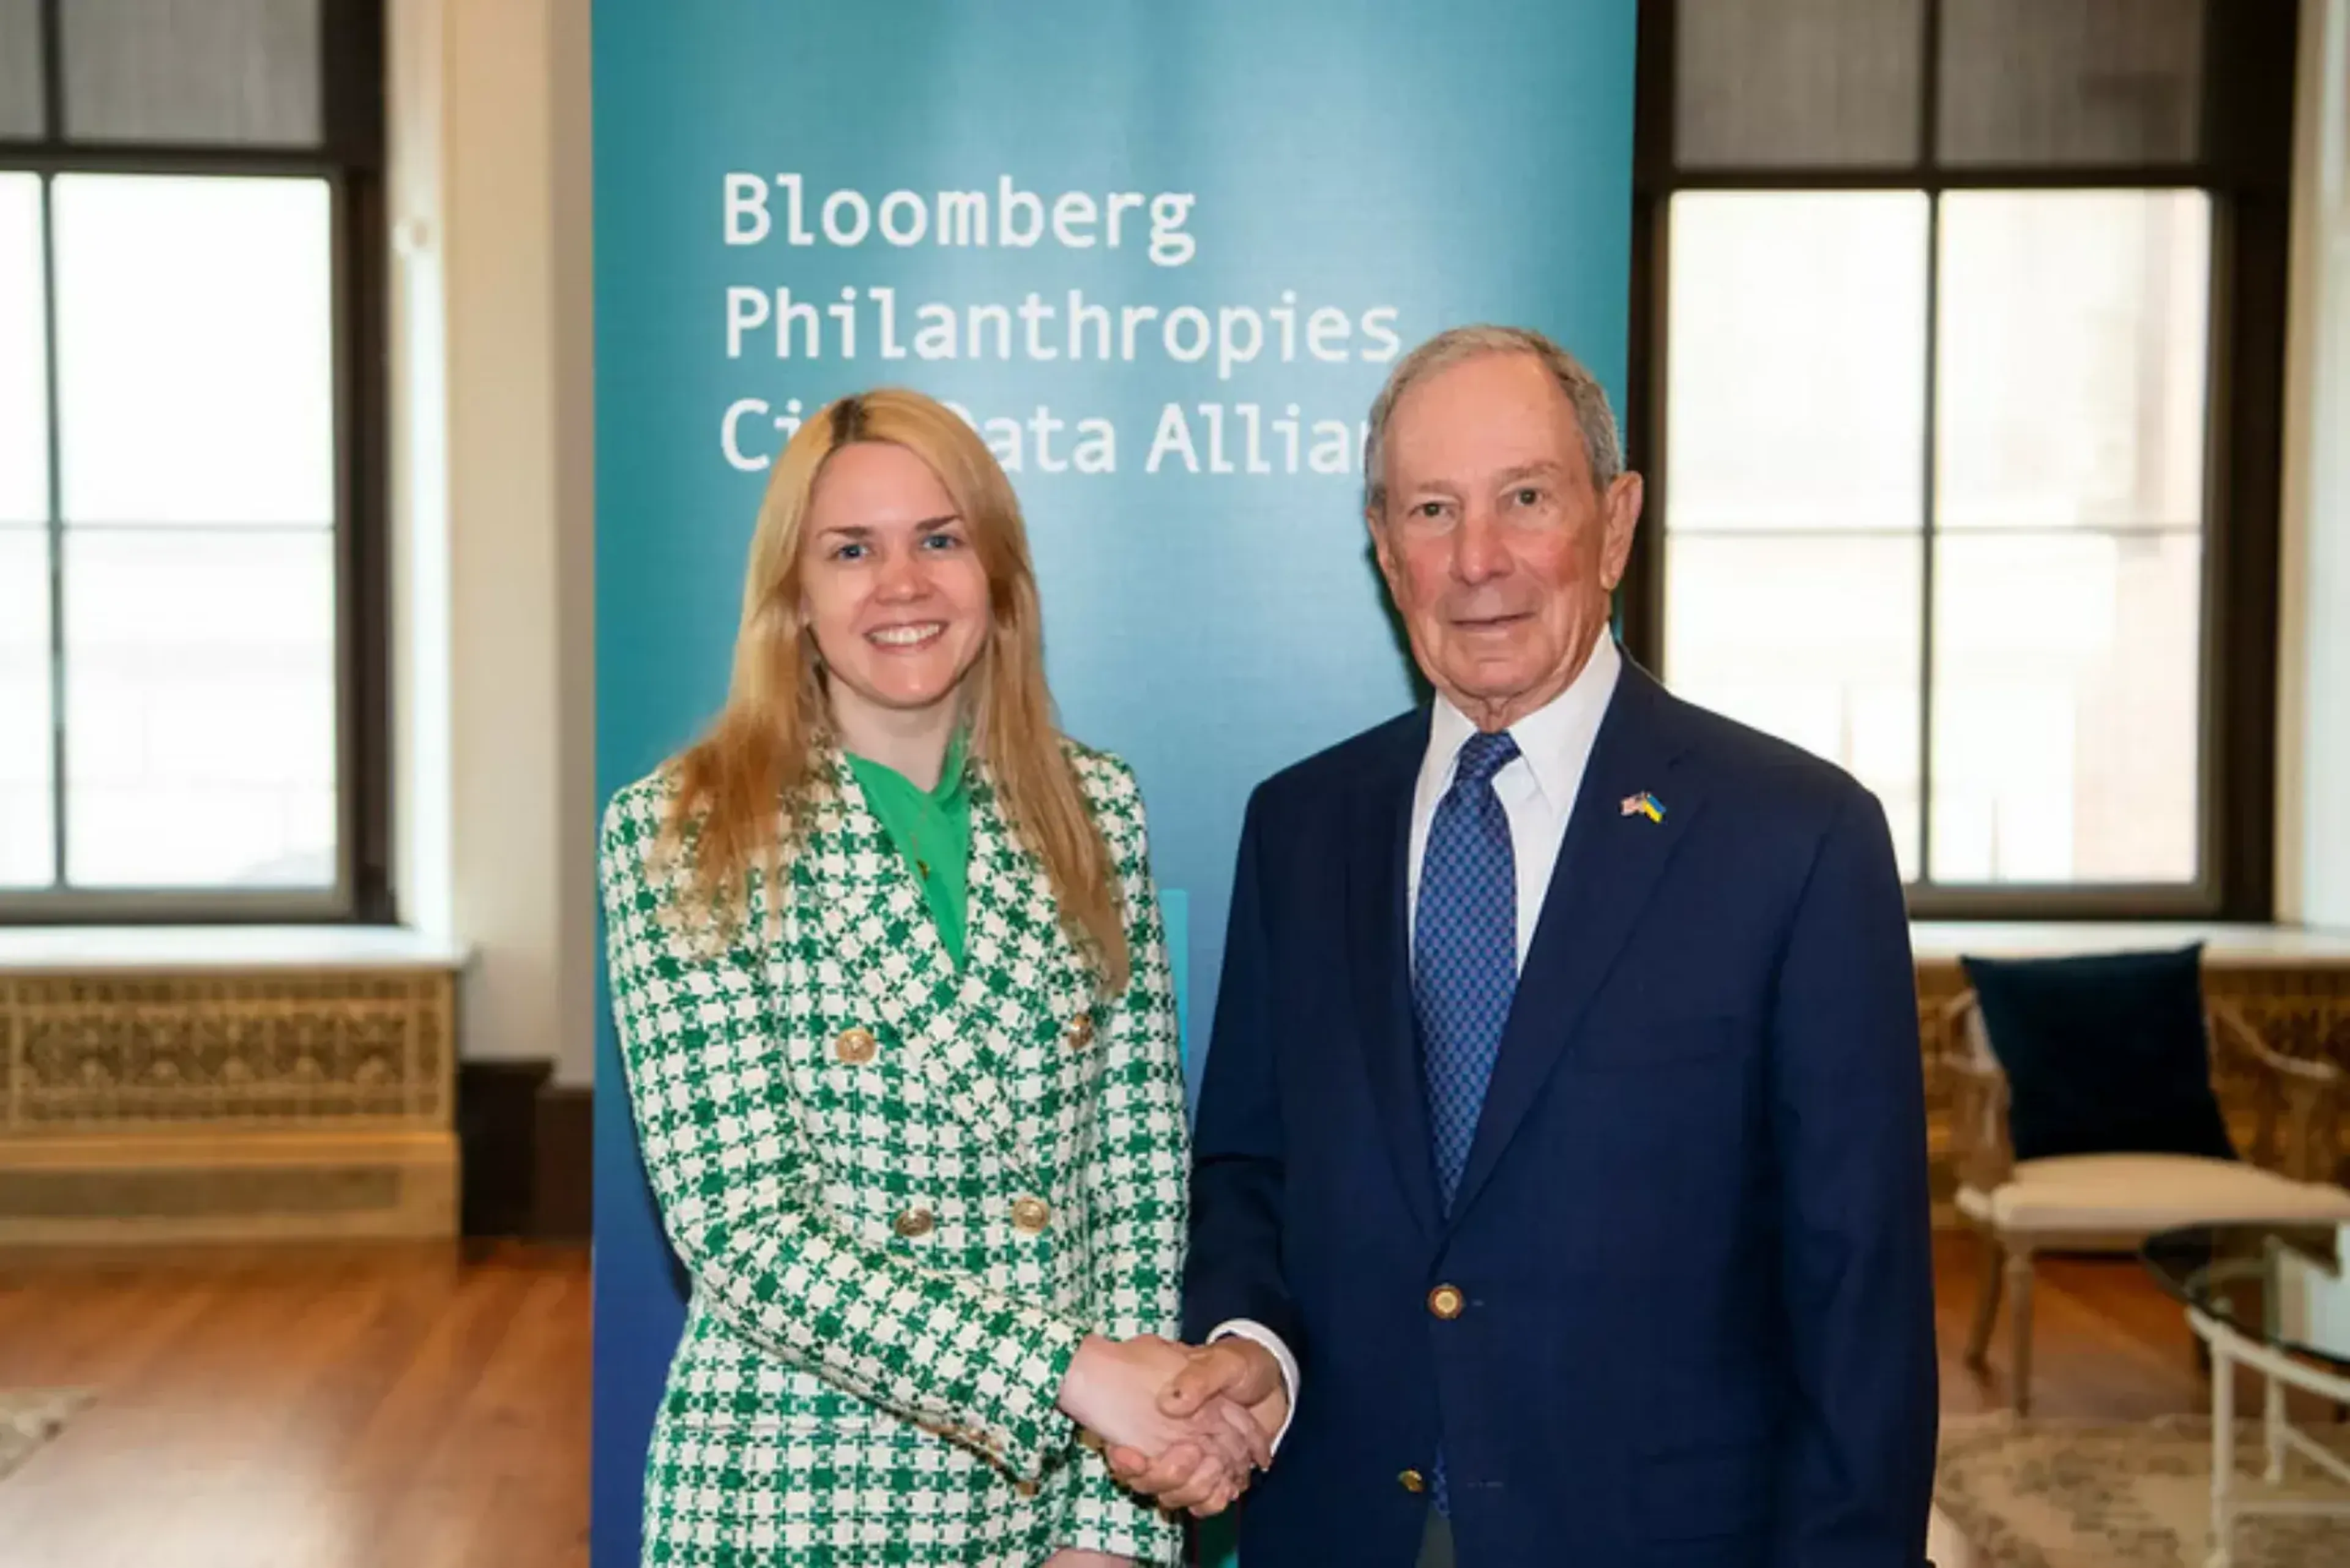 Amanda with Michael Bloomberg at the Bloomberg Philanthropies City Data Alliance Mayoral Convening in Baltimore